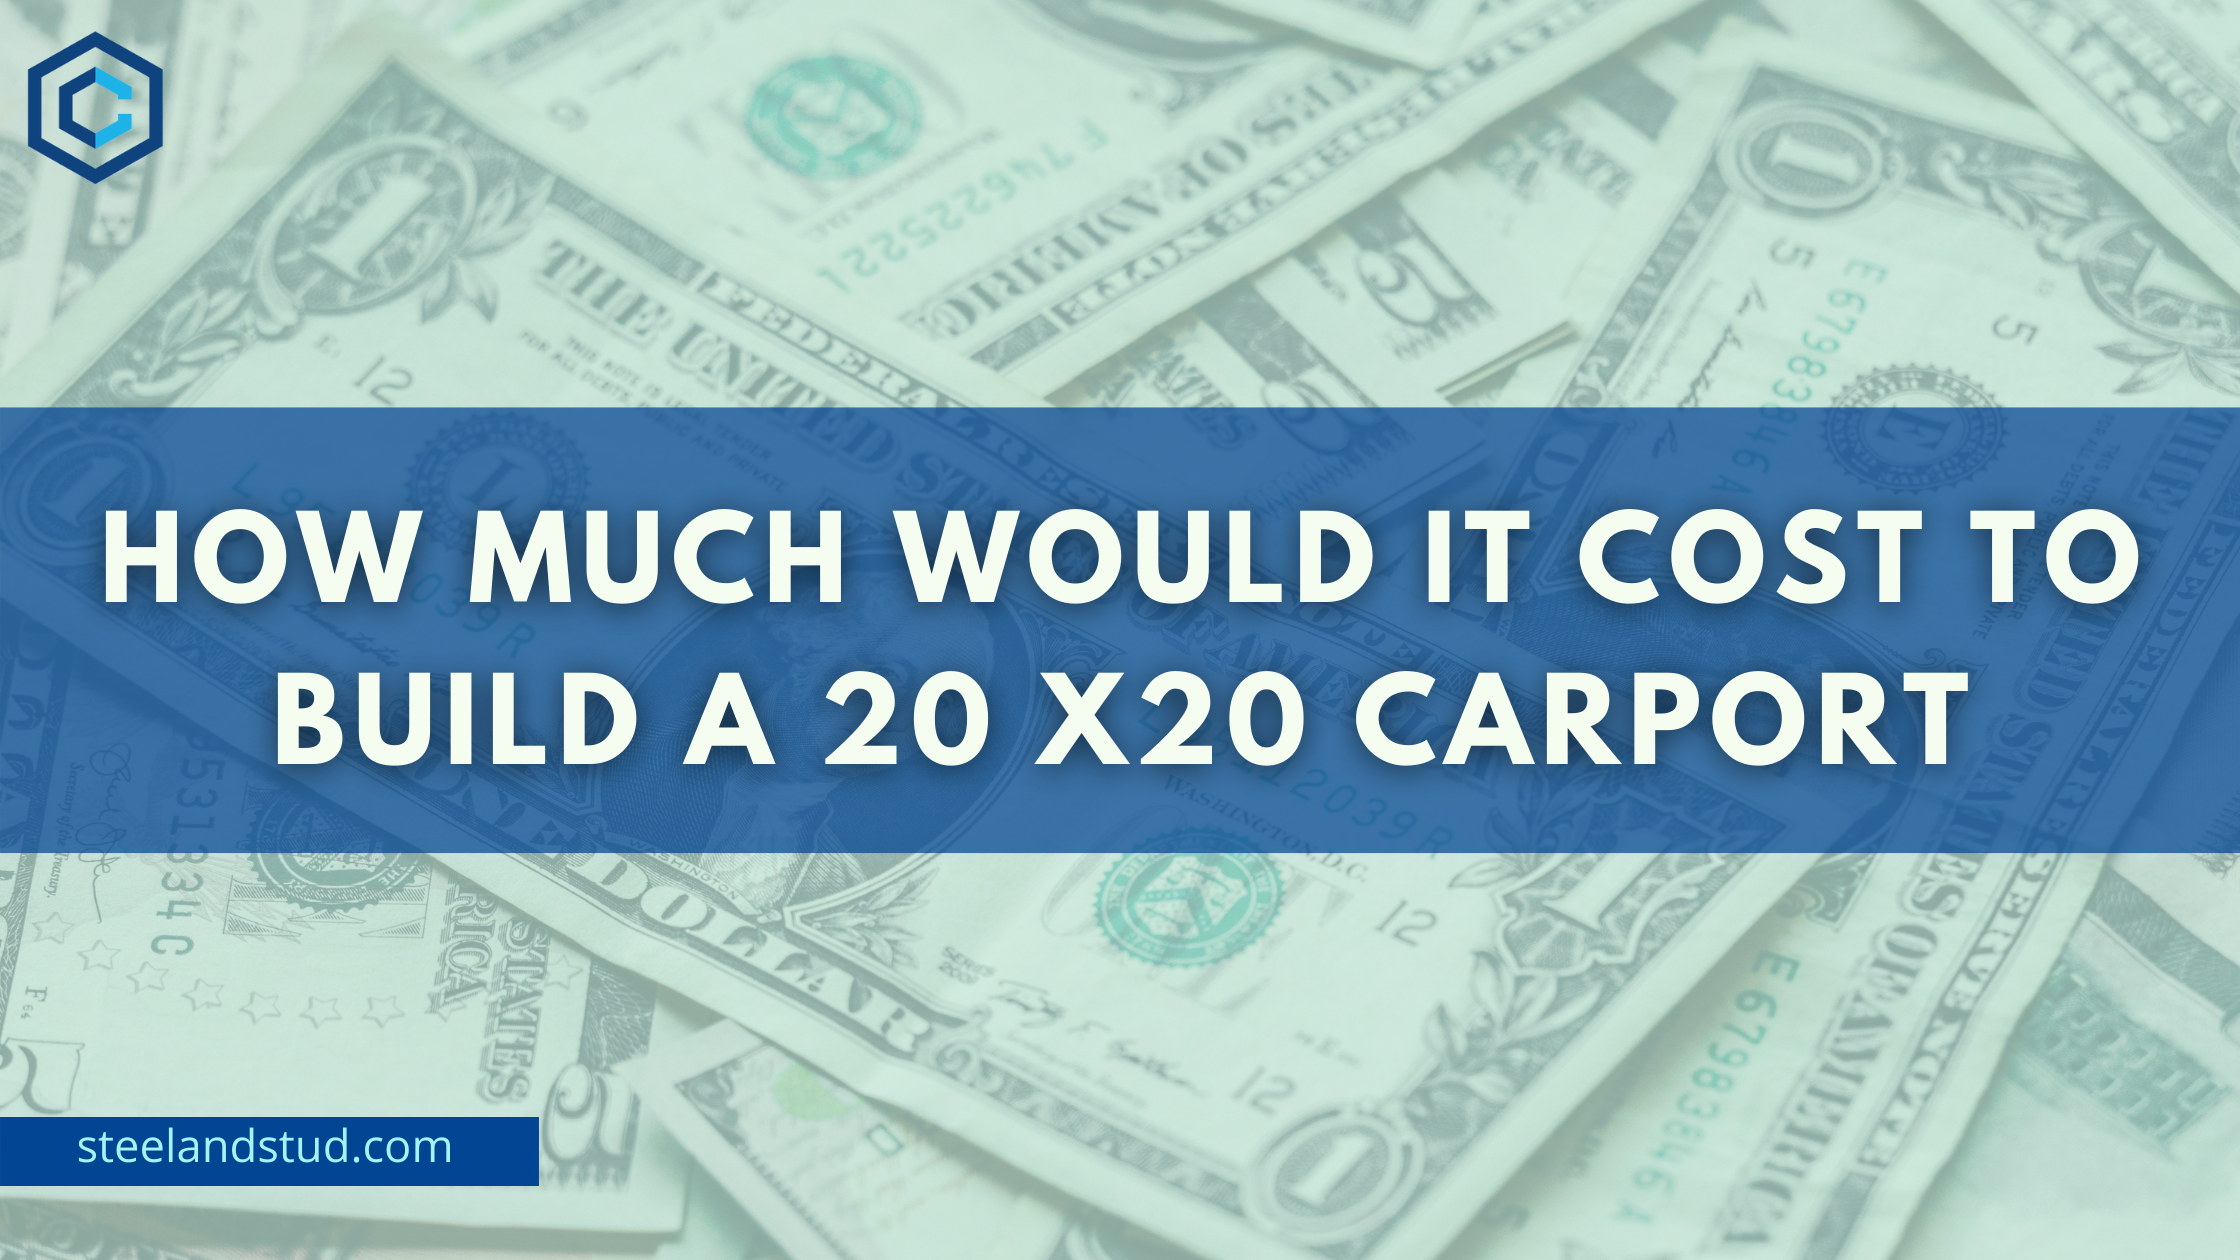 How much would it cost to build a 20 x20 carport